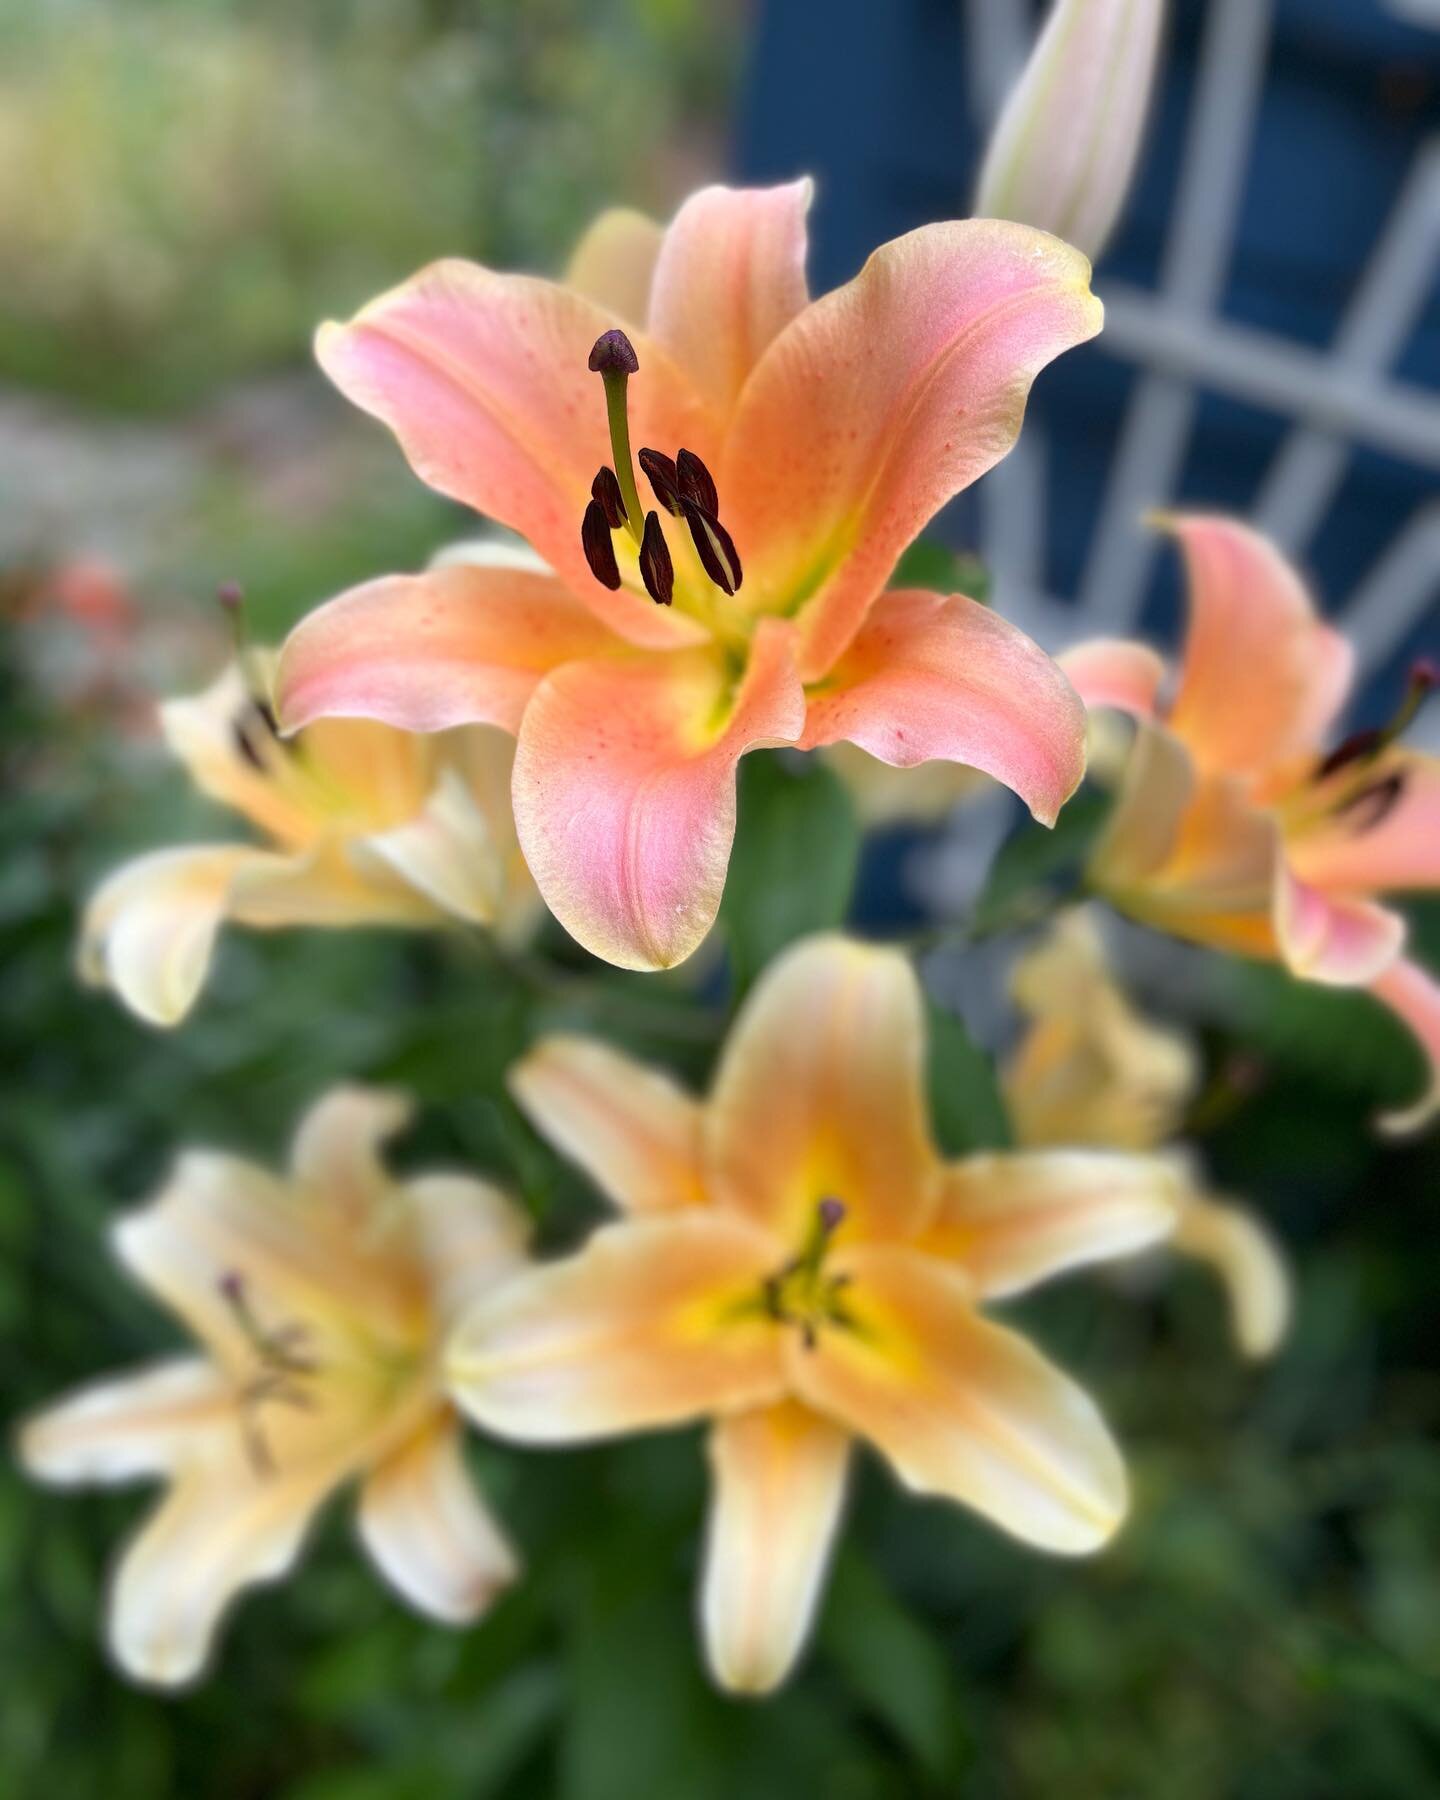 Have you seen these towers of lilies? They amaze my little senses! They are 7+ feet tall, smell like the most delicious natural perfume, and emit blooms and blooms! Tomorrow is the last day to sign up for the 7 week flower CSA through @47thavefarm. I